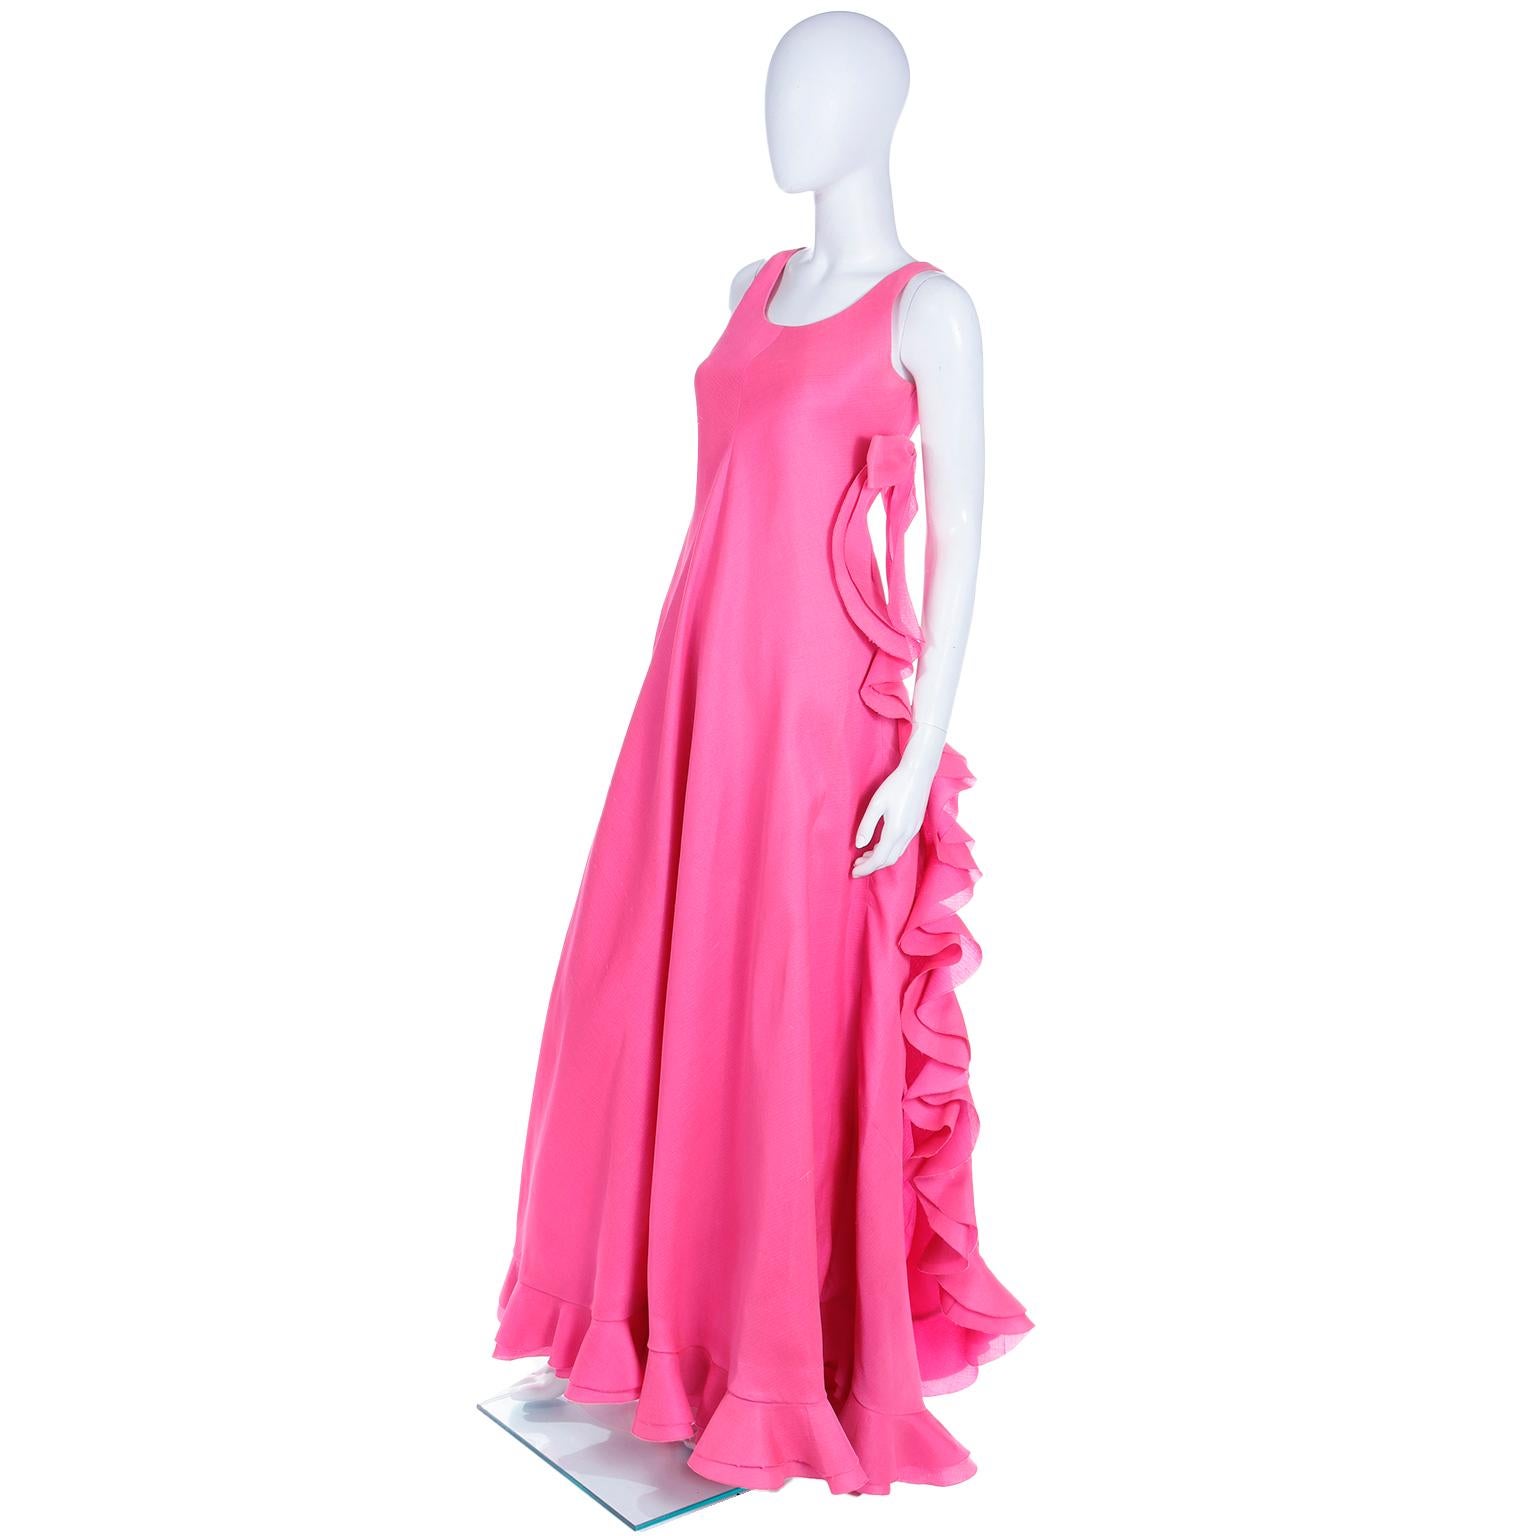 1971 Christian Dior Haute Couture Pink Ruffled Runway Evening Dress Grace Kelly  8